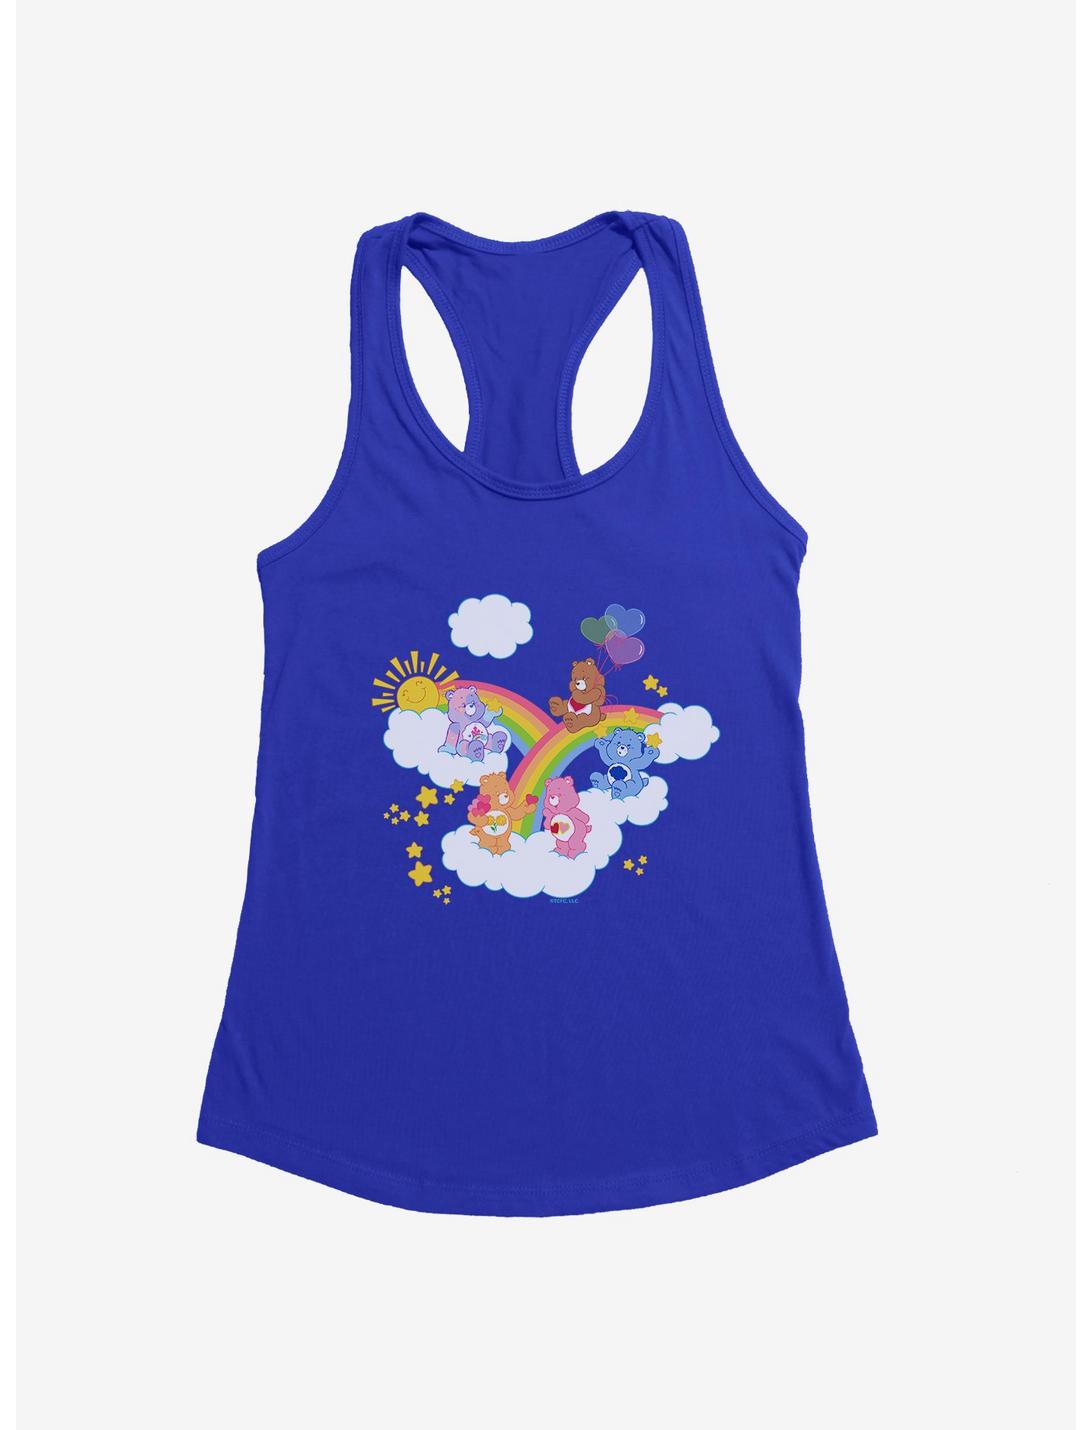 Care Bears Over The Rainbow Girls Tank Top, ROYAL, hi-res